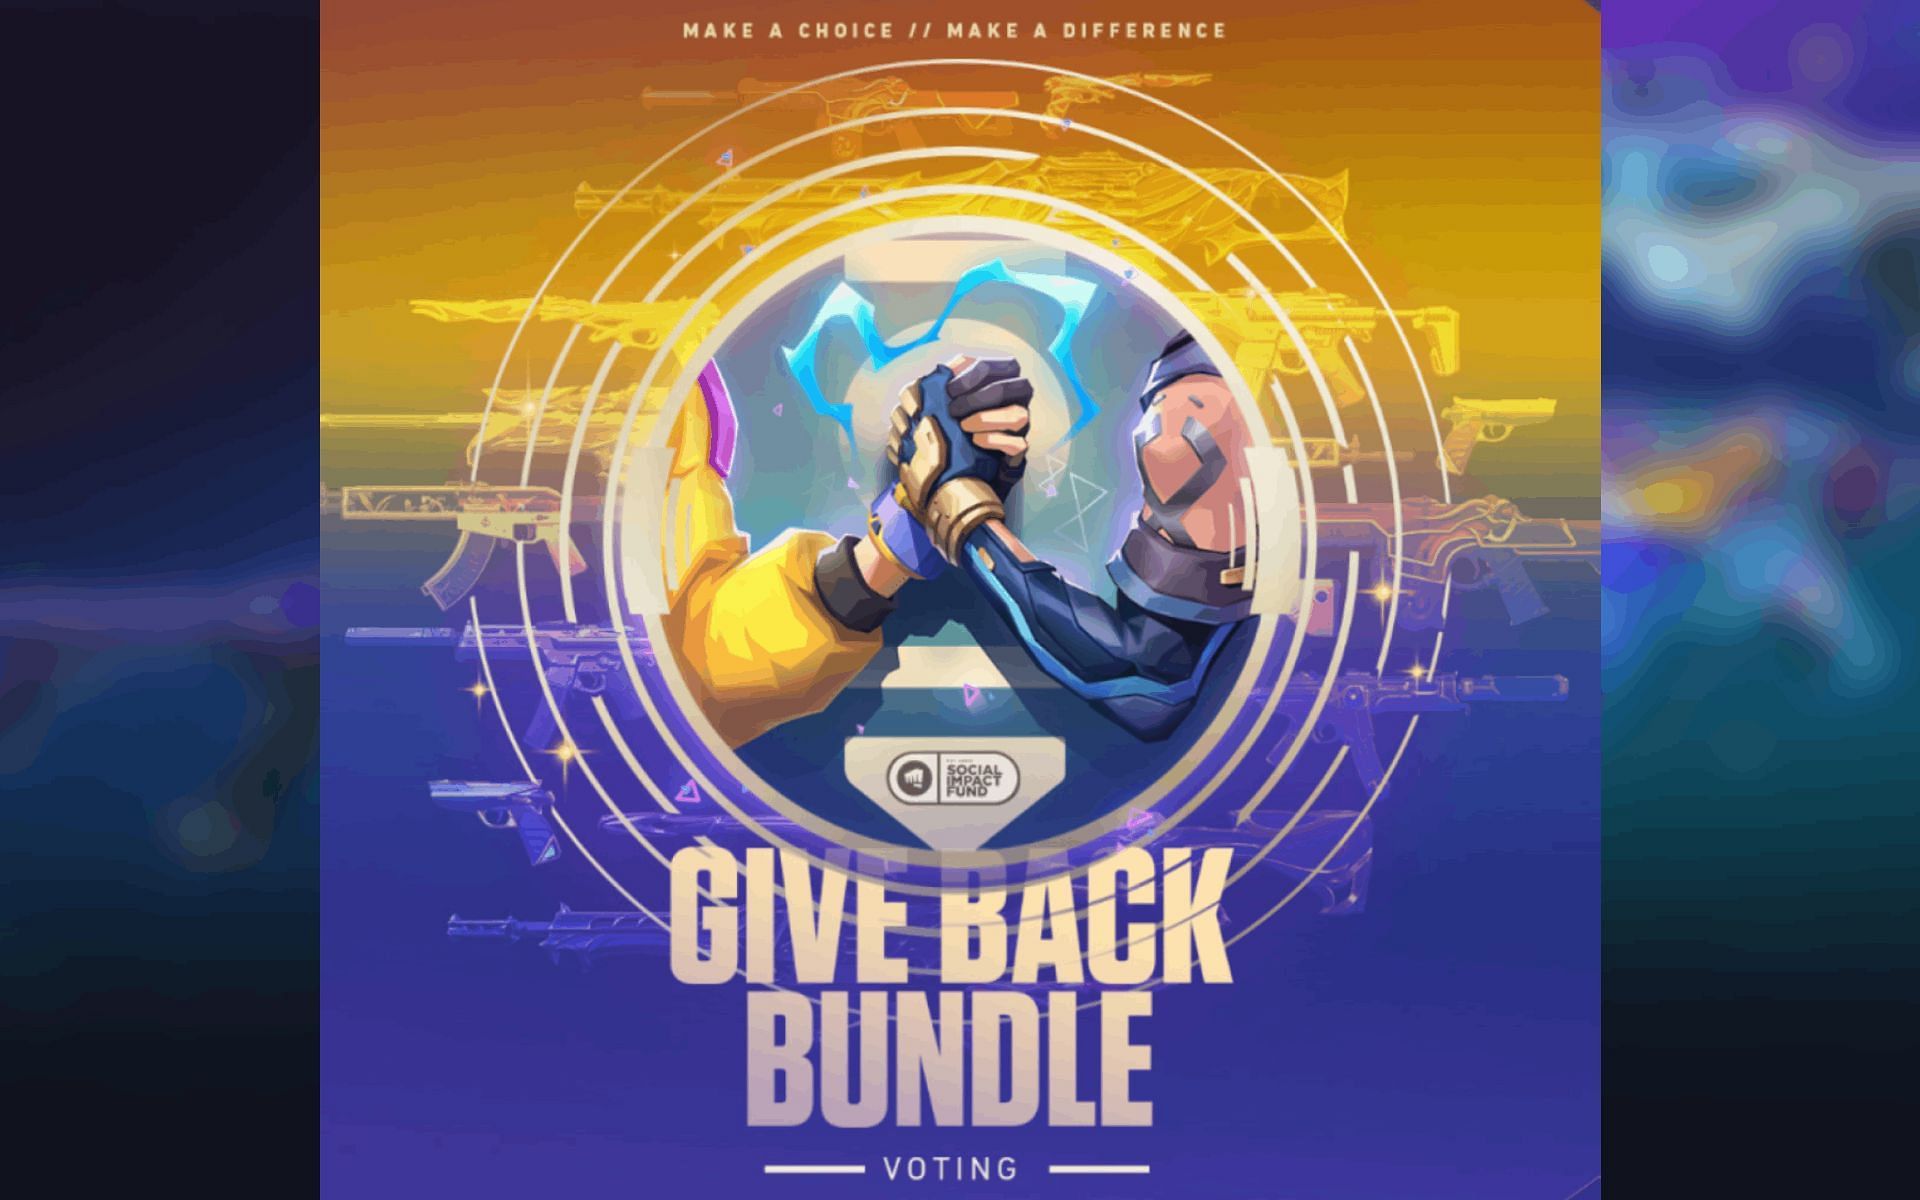 Valorant's Give Back Bundle is live now How to vote, skin choices, and